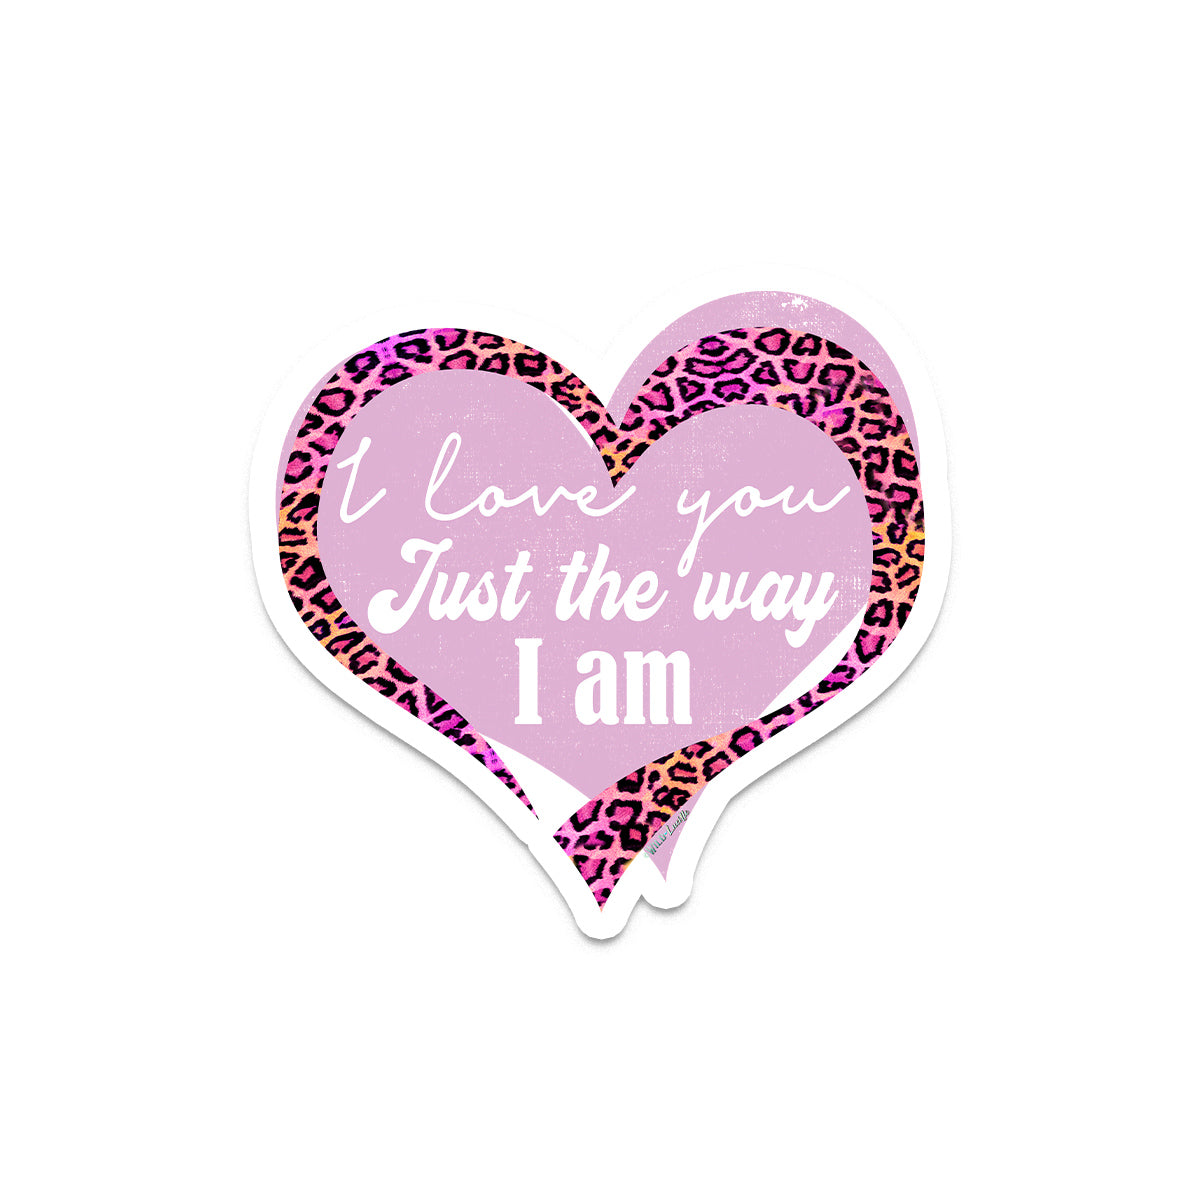 I Love You Just The Way I Am - Vinyl Sticker Decals